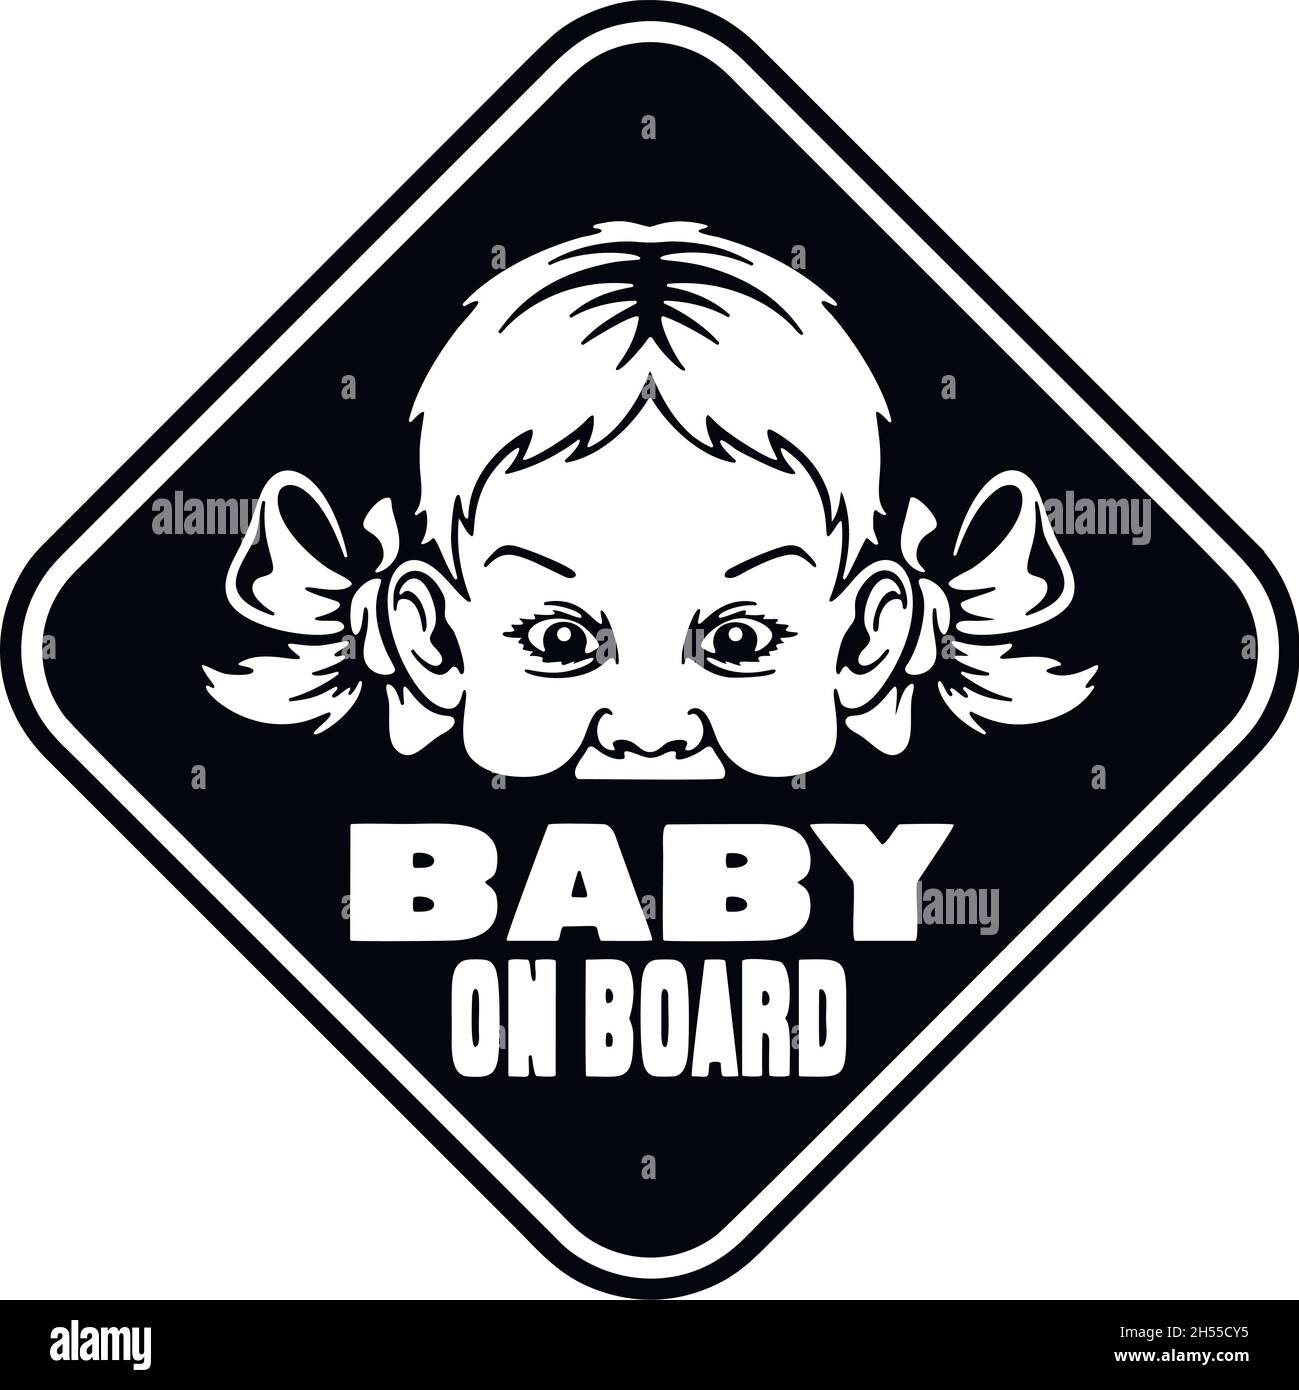 Baby on board - Sticker for car isolated on white. Vector stock